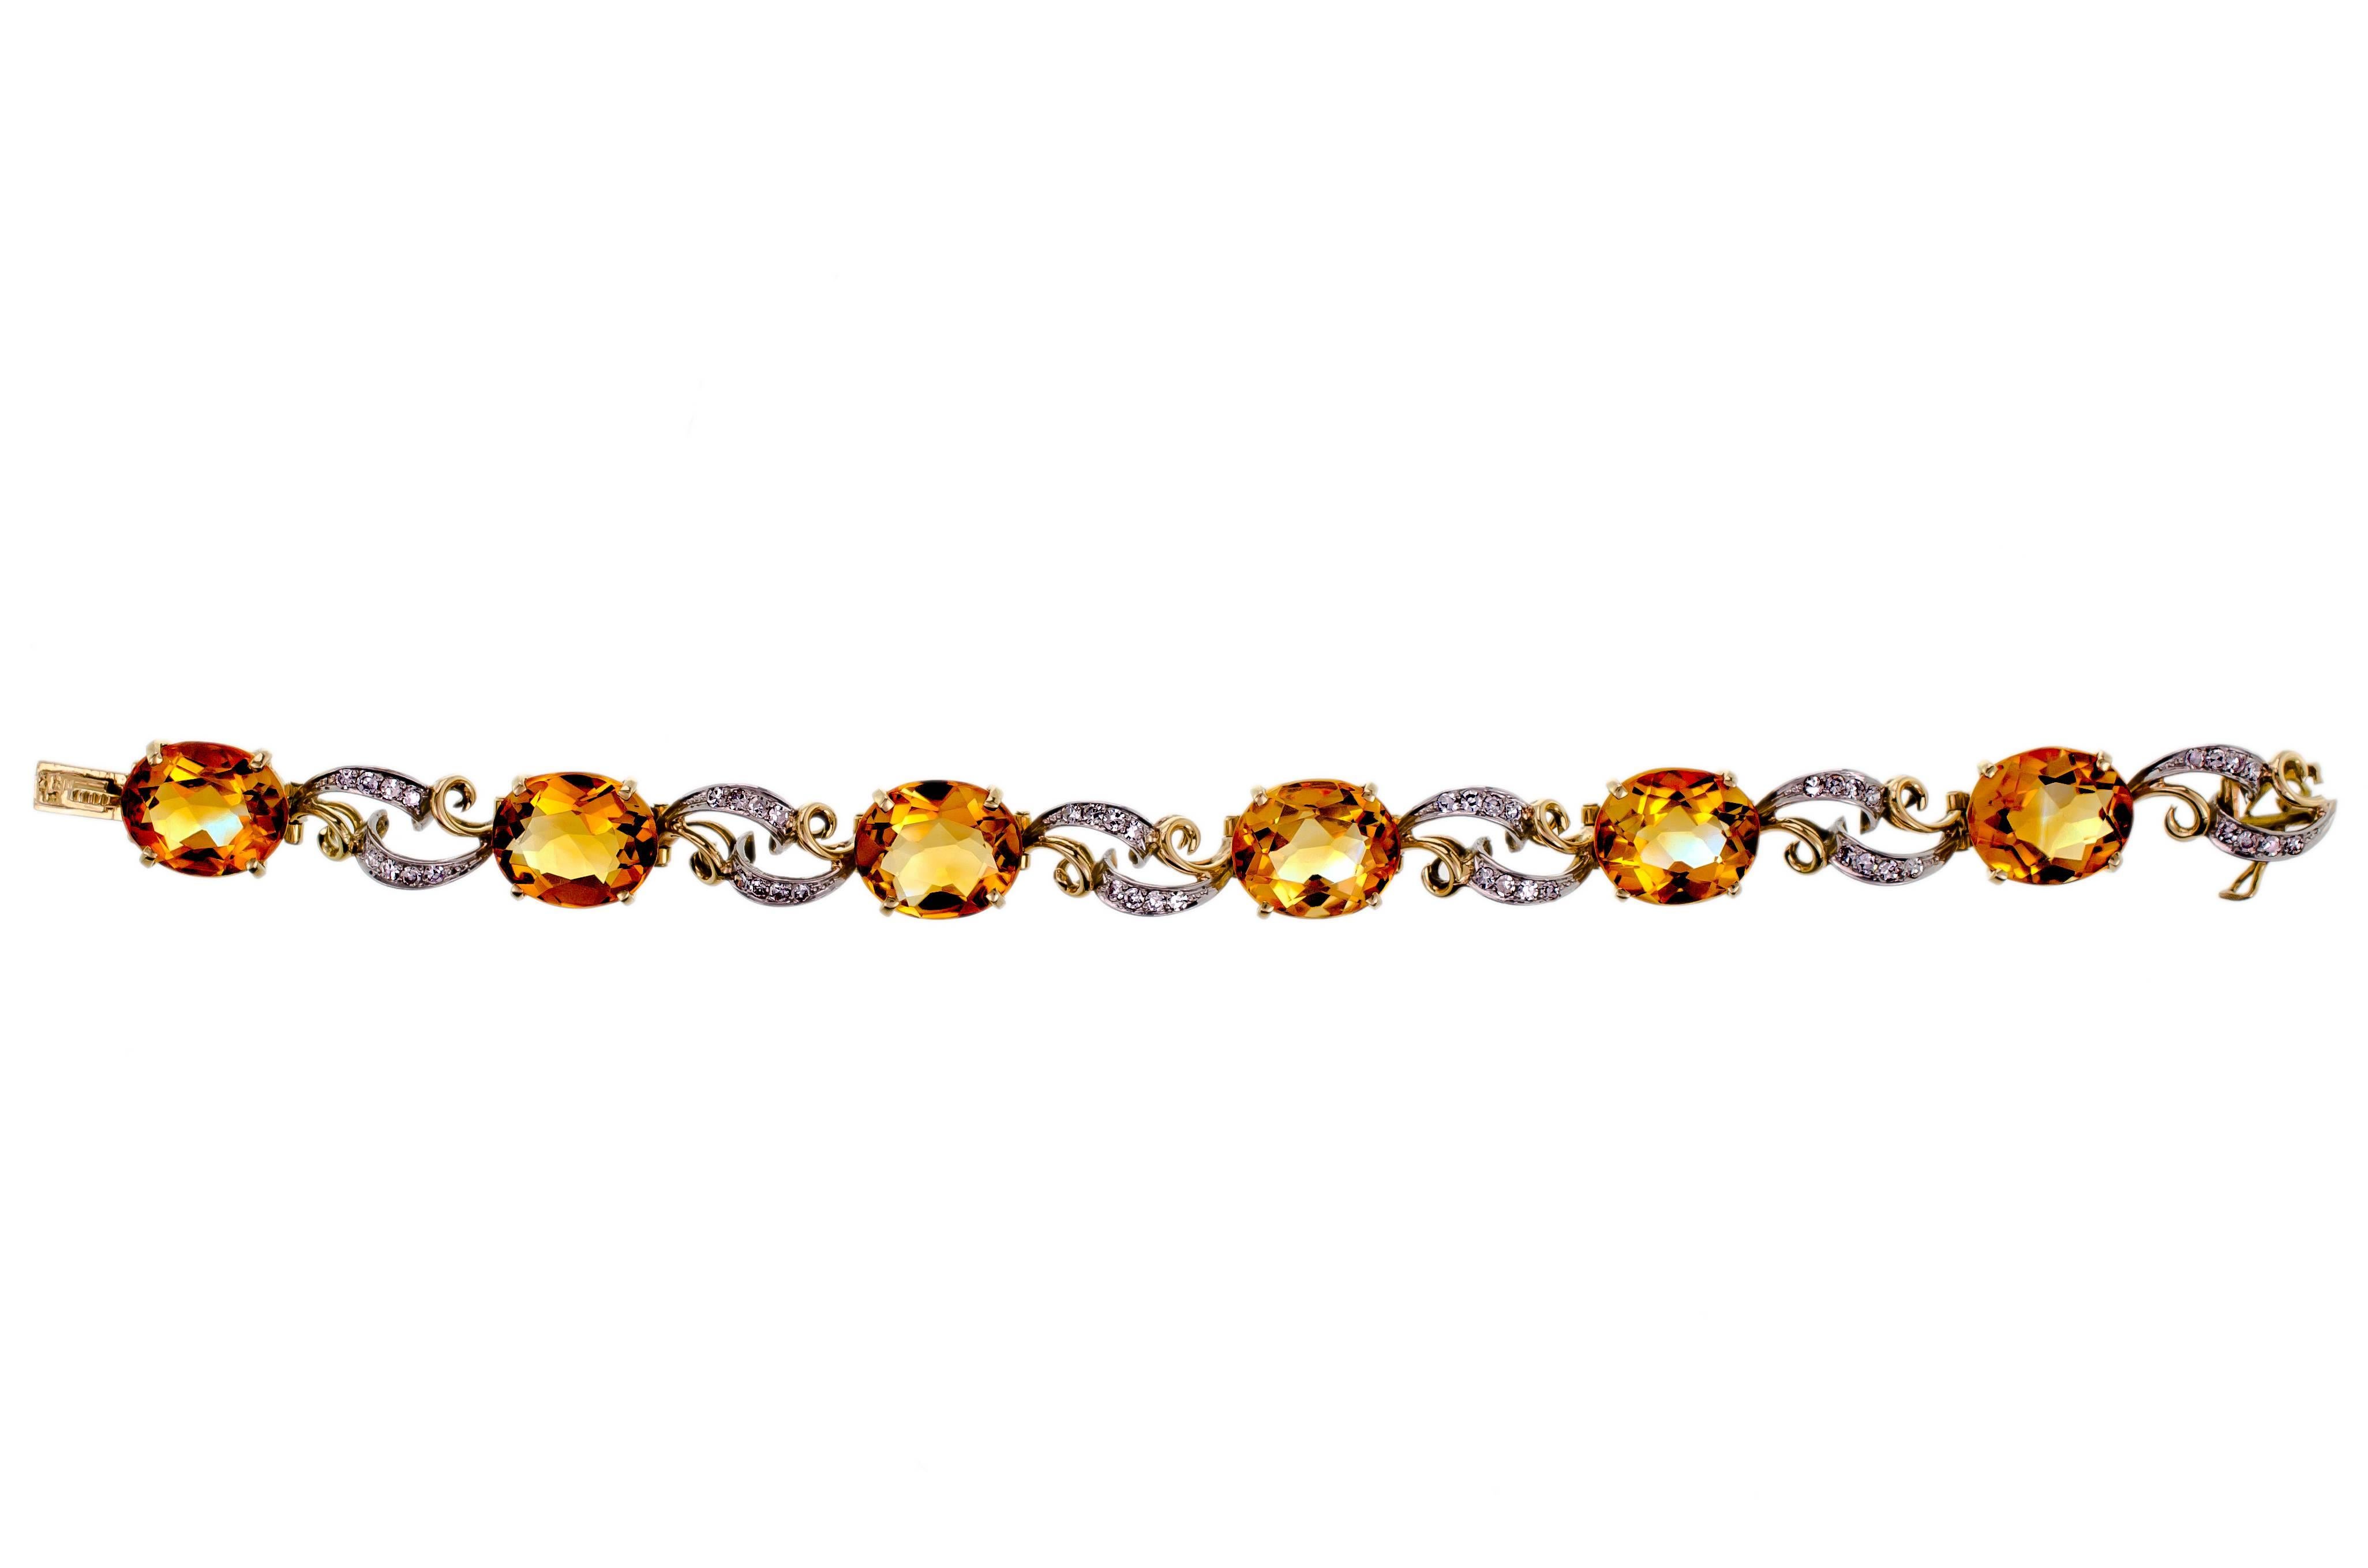 Beautifulvintage citrine and diamond flexible bracelet set with six (6) oval mixed cut citrines measuring approximately 12.5 x 10.2 mm further accented with 48 single cut diamonds with an approximate weight of .60 cts total set into a platinum and